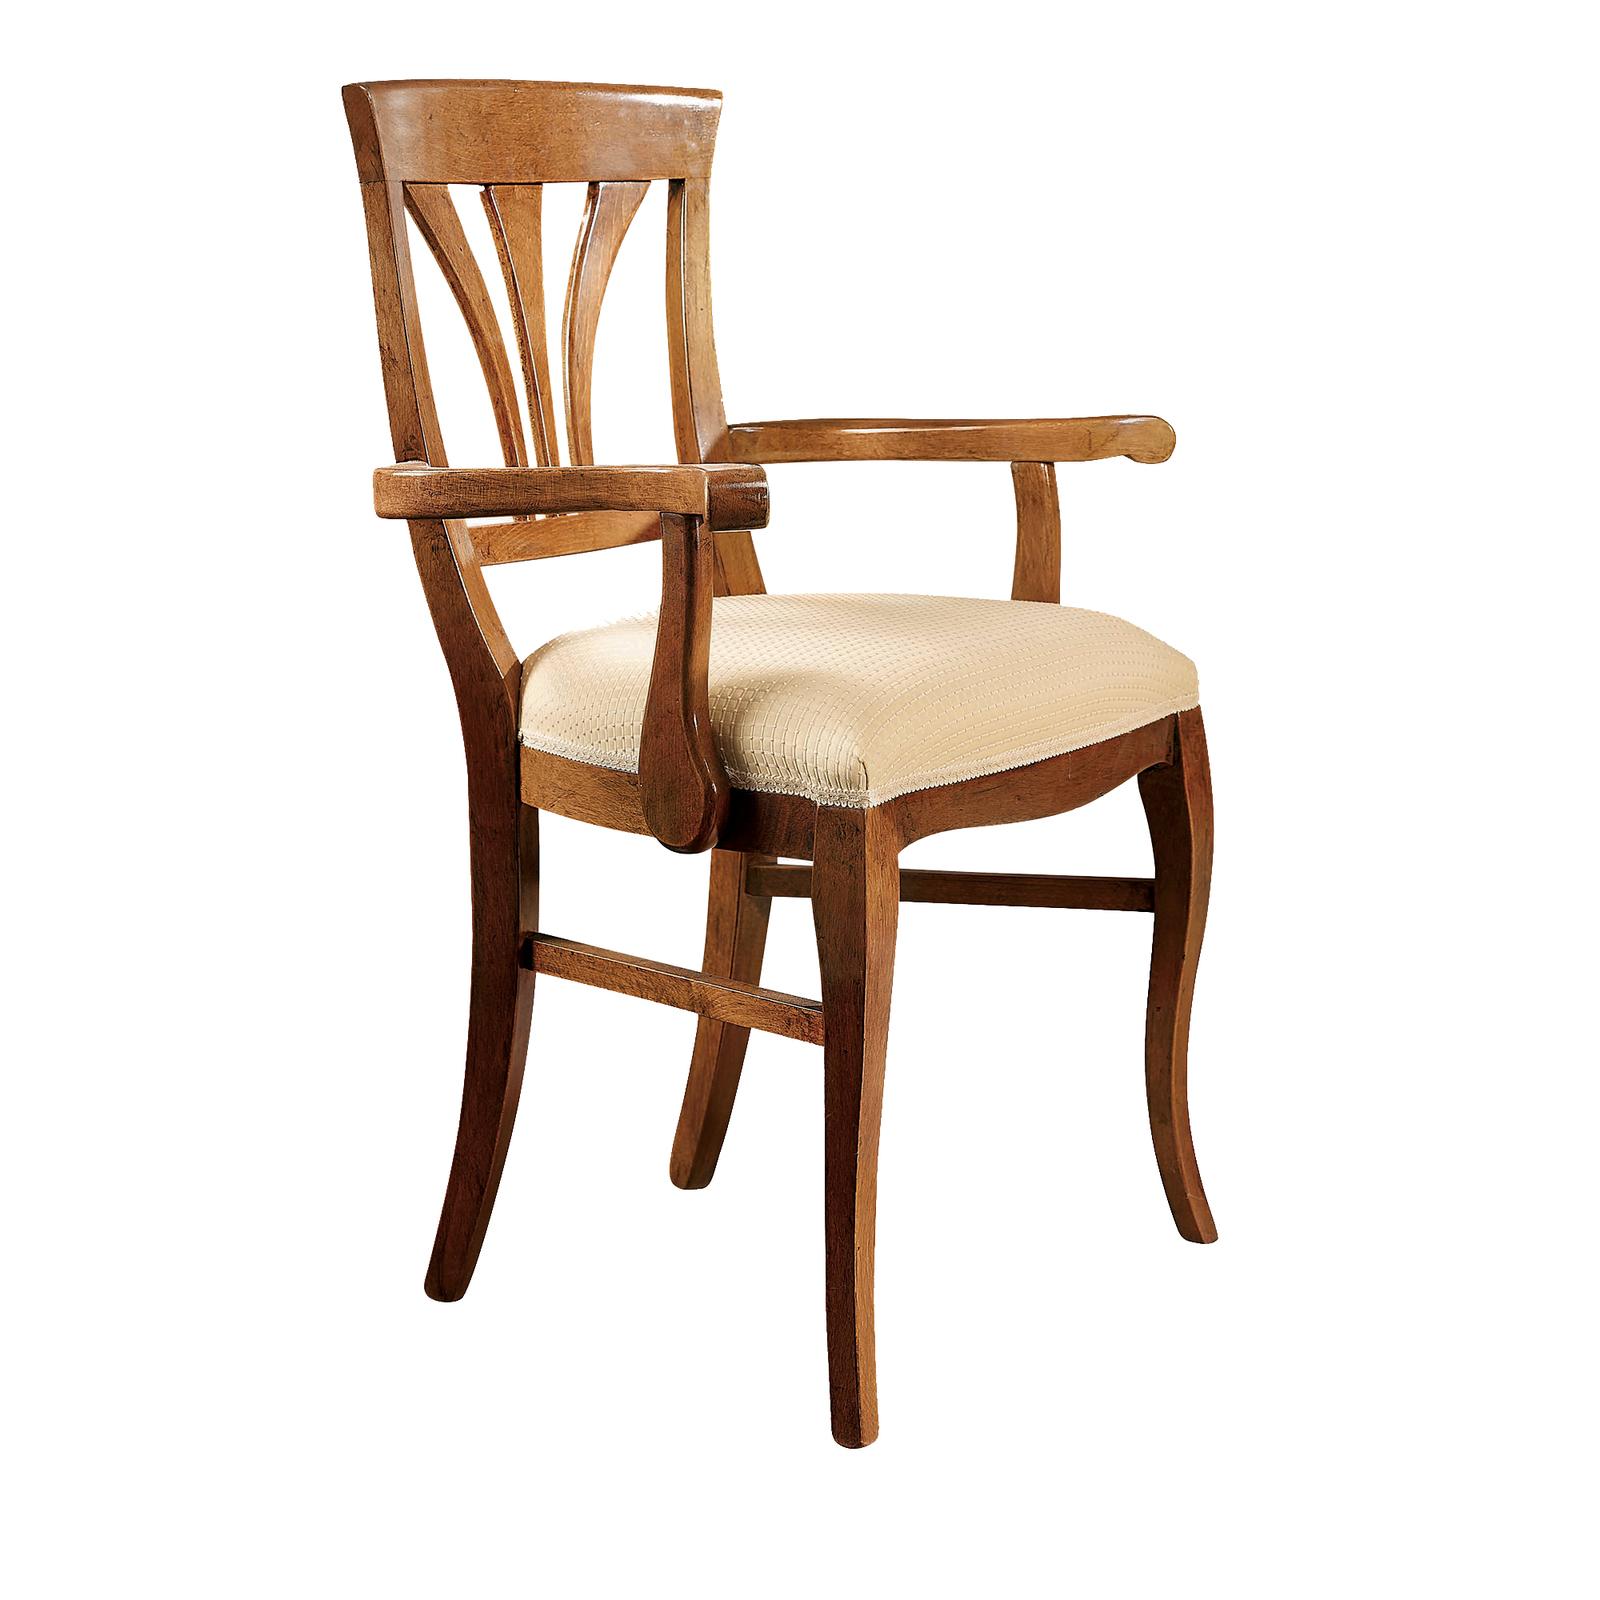 This classic chair is characterized by exceptional craftsmanship and modern aesthetic balance. The wooden frame effortlessly flows from the bold backrest to the curved architectural arms and into the flared legs. The chair stands out for its